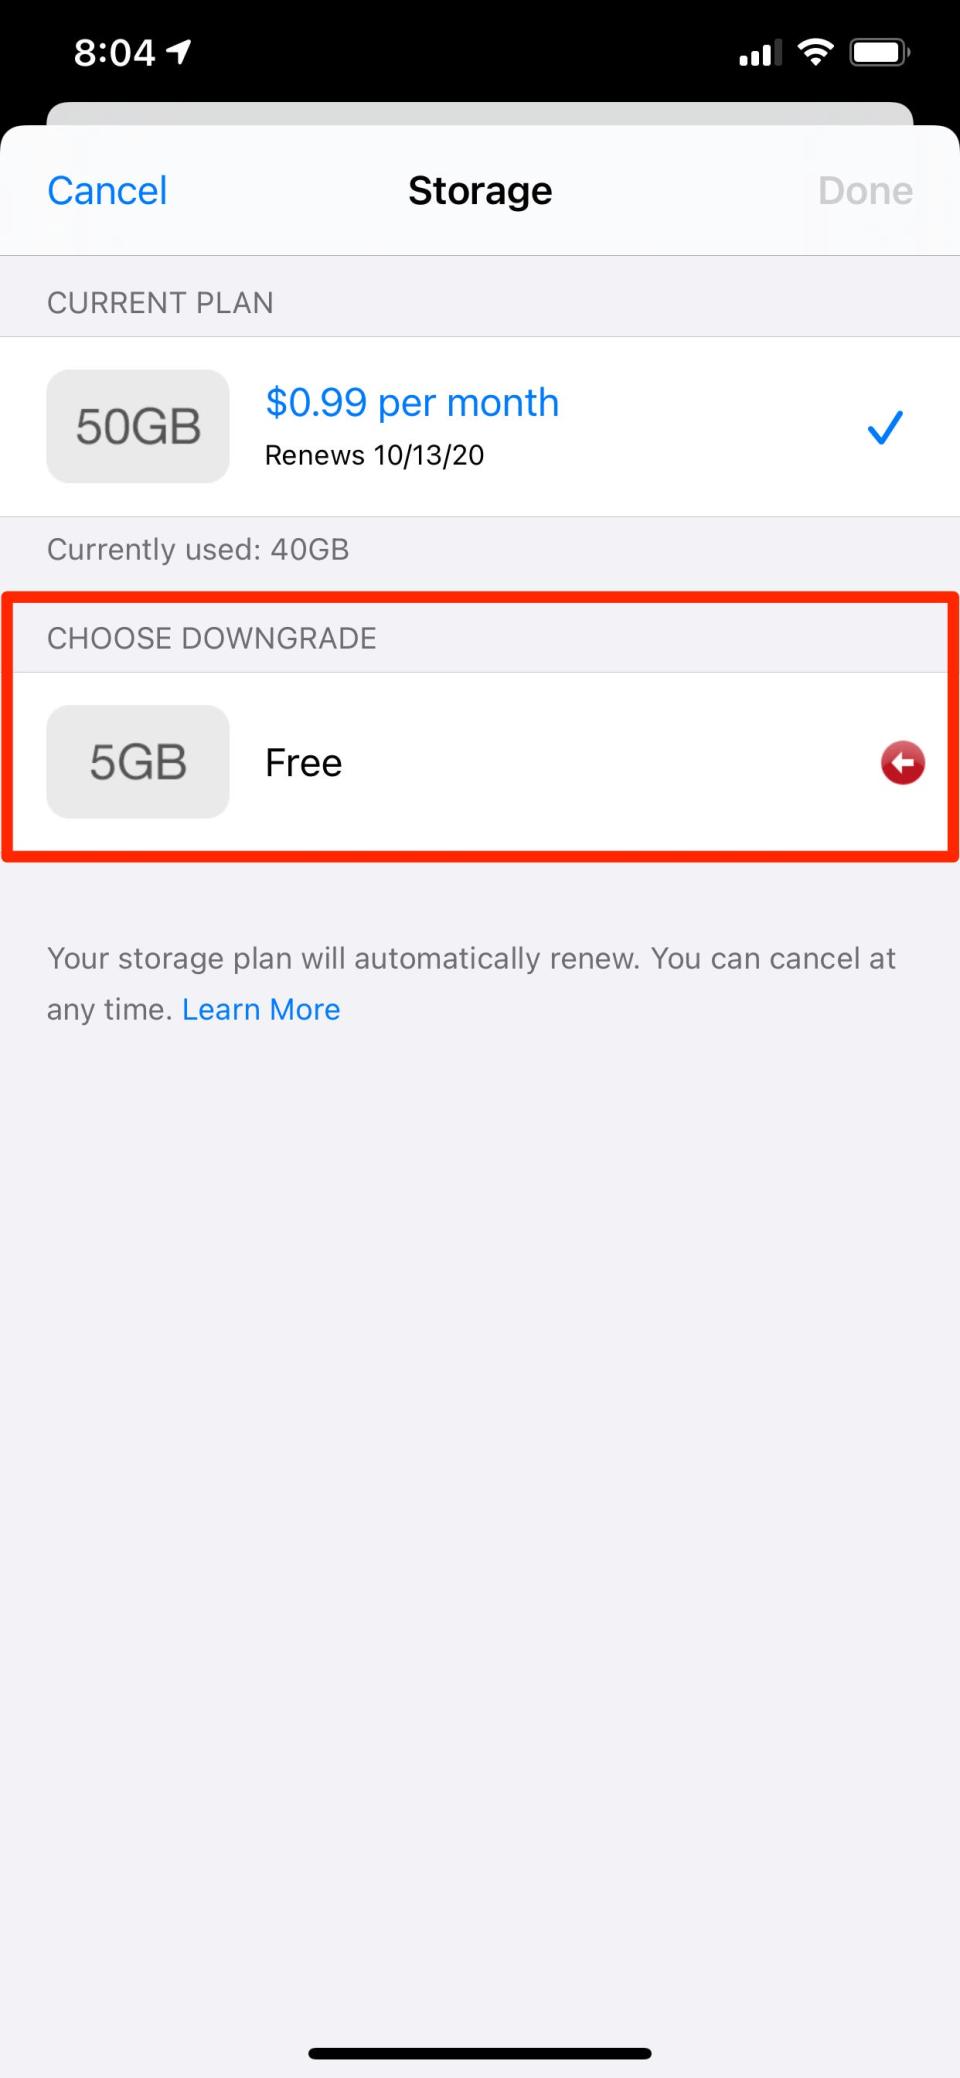 How to cancel your iCloud storage plan 2